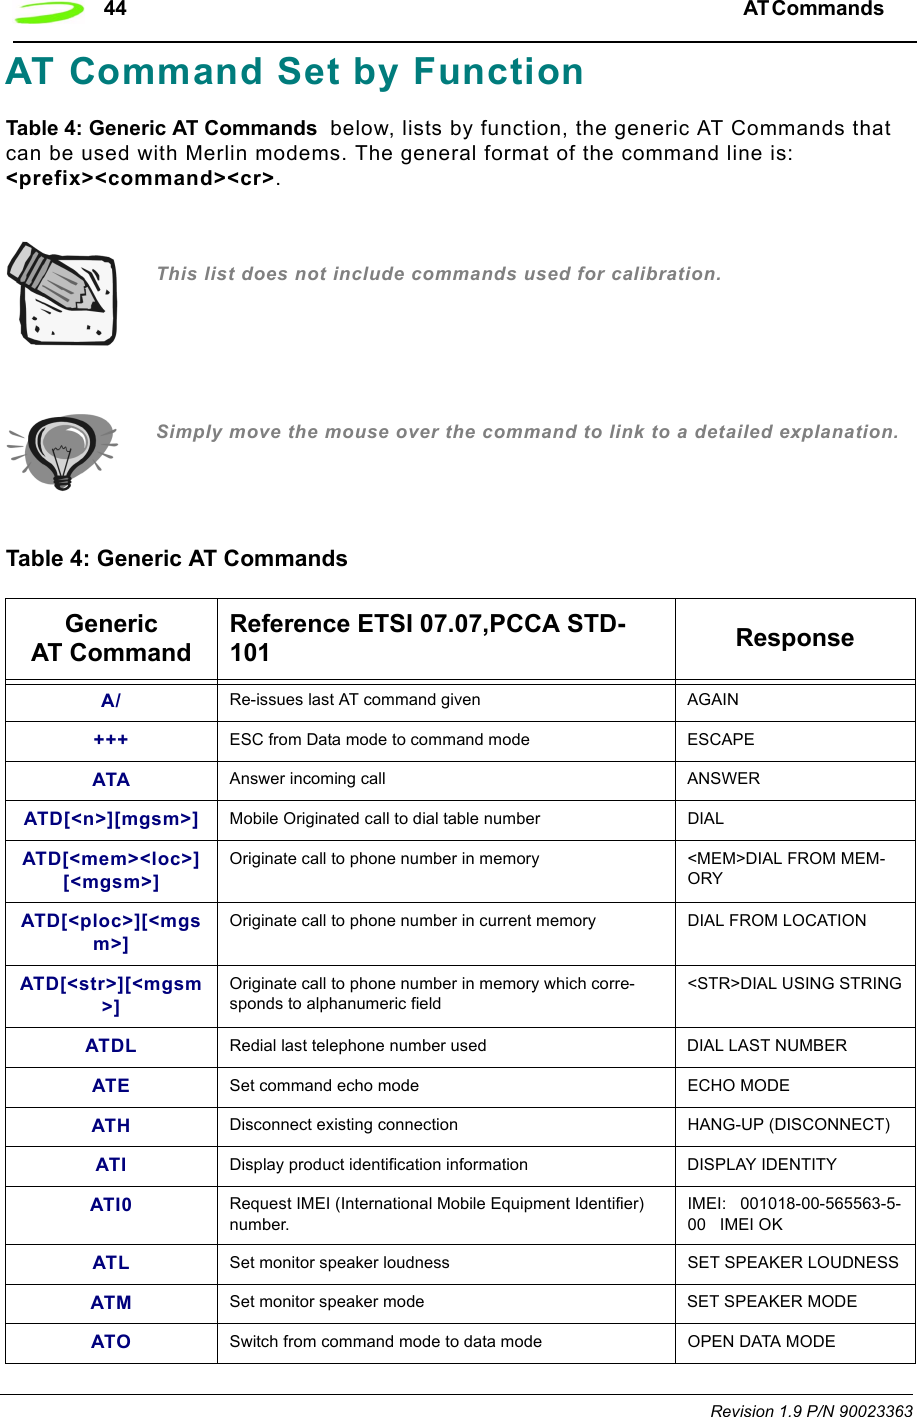 44 AT Commands  Revision 1.9 P/N 90023363AT Command Set by FunctionTable 4: Generic AT Commands  below, lists by function, the generic AT Commands that can be used with Merlin modems. The general format of the command line is: &lt;prefix&gt;&lt;command&gt;&lt;cr&gt;. This list does not include commands used for calibration.Simply move the mouse over the command to link to a detailed explanation.Table 4: Generic AT CommandsGeneric AT Command Reference ETSI 07.07,PCCA STD-101 ResponseA/ Re-issues last AT command given AGAIN+++ ESC from Data mode to command mode ESCAPEATA Answer incoming call ANSWERATD[&lt;n&gt;][mgsm&gt;] Mobile Originated call to dial table number DIALATD[&lt;mem&gt;&lt;loc&gt;][&lt;mgsm&gt;]Originate call to phone number in memory  &lt;MEM&gt;DIAL FROM MEM-ORYATD[&lt;ploc&gt;][&lt;mgsm&gt;]Originate call to phone number in current memory DIAL FROM LOCATIONATD[&lt;str&gt;][&lt;mgsm&gt;]Originate call to phone number in memory which corre-sponds to alphanumeric field &lt;STR&gt;DIAL USING STRINGATDL Redial last telephone number used DIAL LAST NUMBERATE Set command echo mode ECHO MODEATH Disconnect existing connection HANG-UP (DISCONNECT)ATI Display product identification information DISPLAY IDENTITYATI0 Request IMEI (International Mobile Equipment Identifier) number.IMEI:   001018-00-565563-5-00   IMEI OKATL Set monitor speaker loudness SET SPEAKER LOUDNESSATM Set monitor speaker mode SET SPEAKER MODEATO Switch from command mode to data mode OPEN DATA MODE